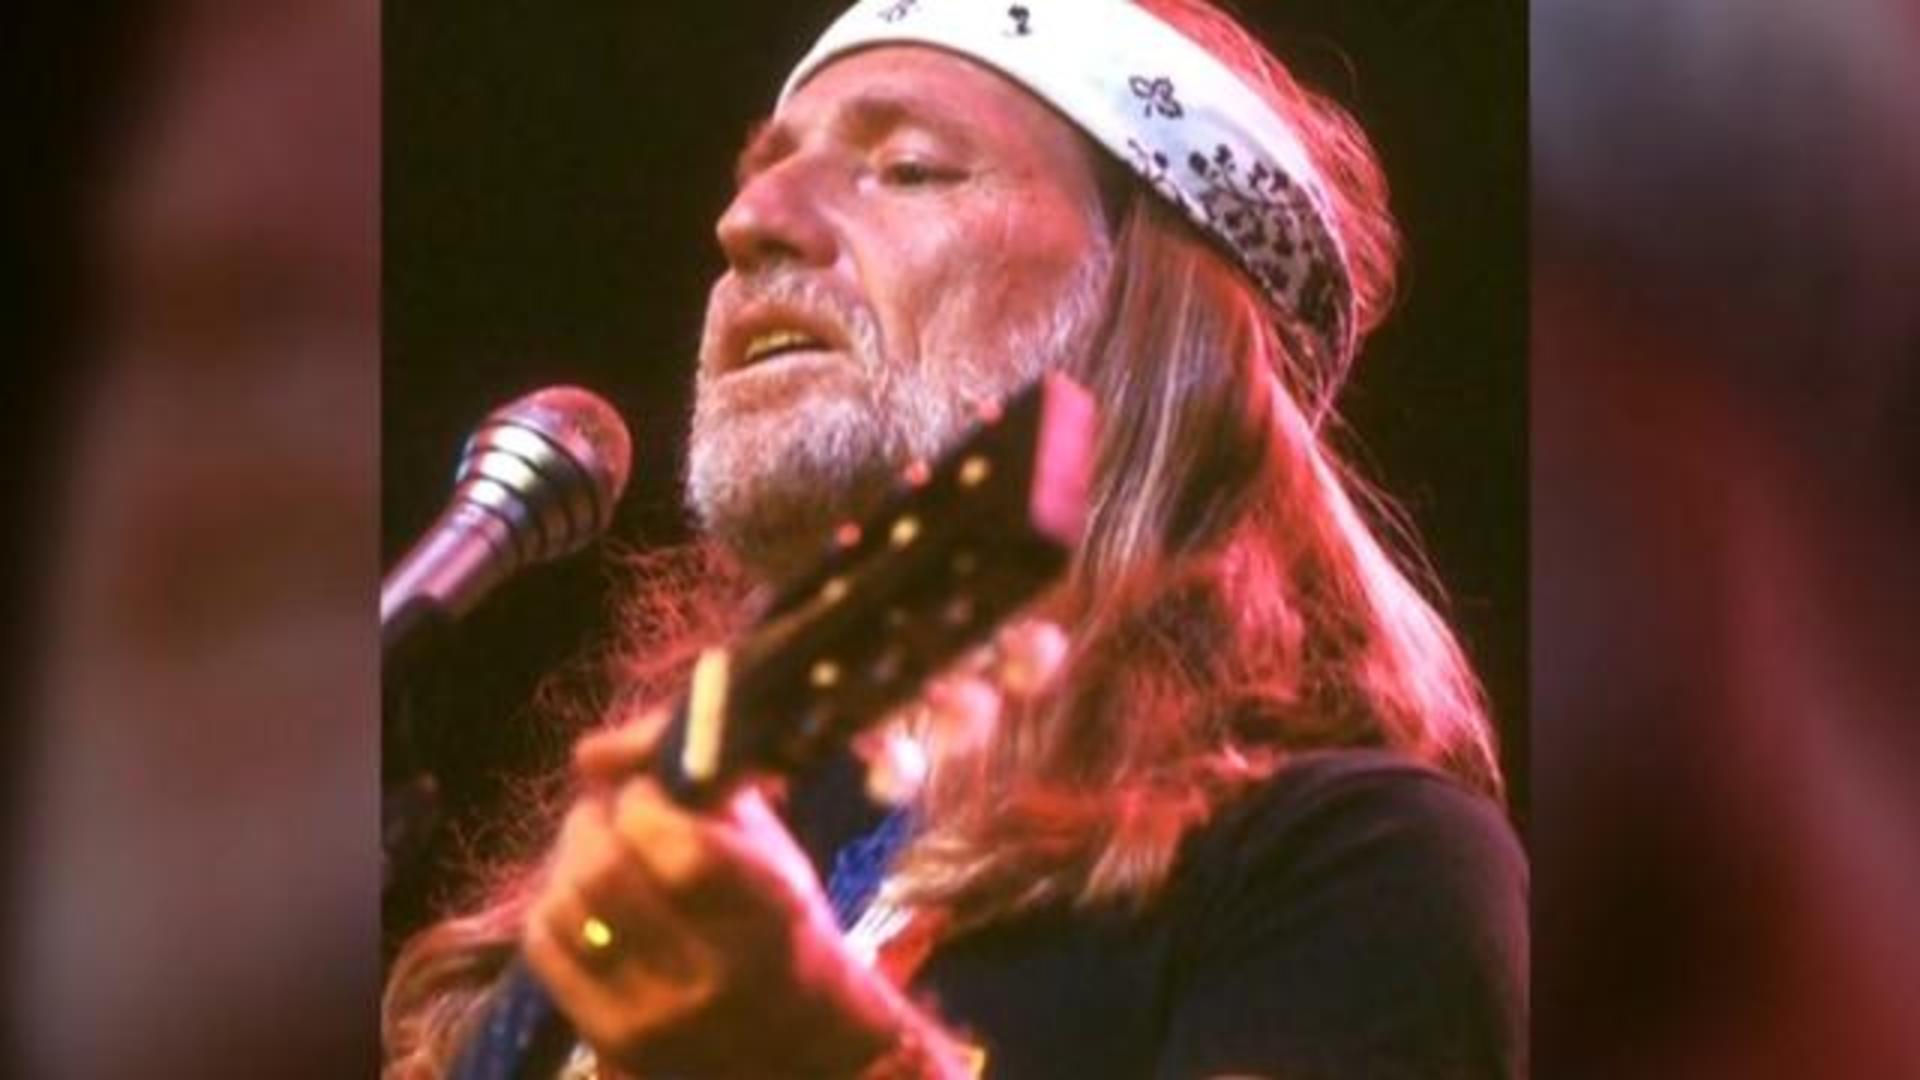 Willie Nelson inhales the love at 90th birthday concert – NewsNation